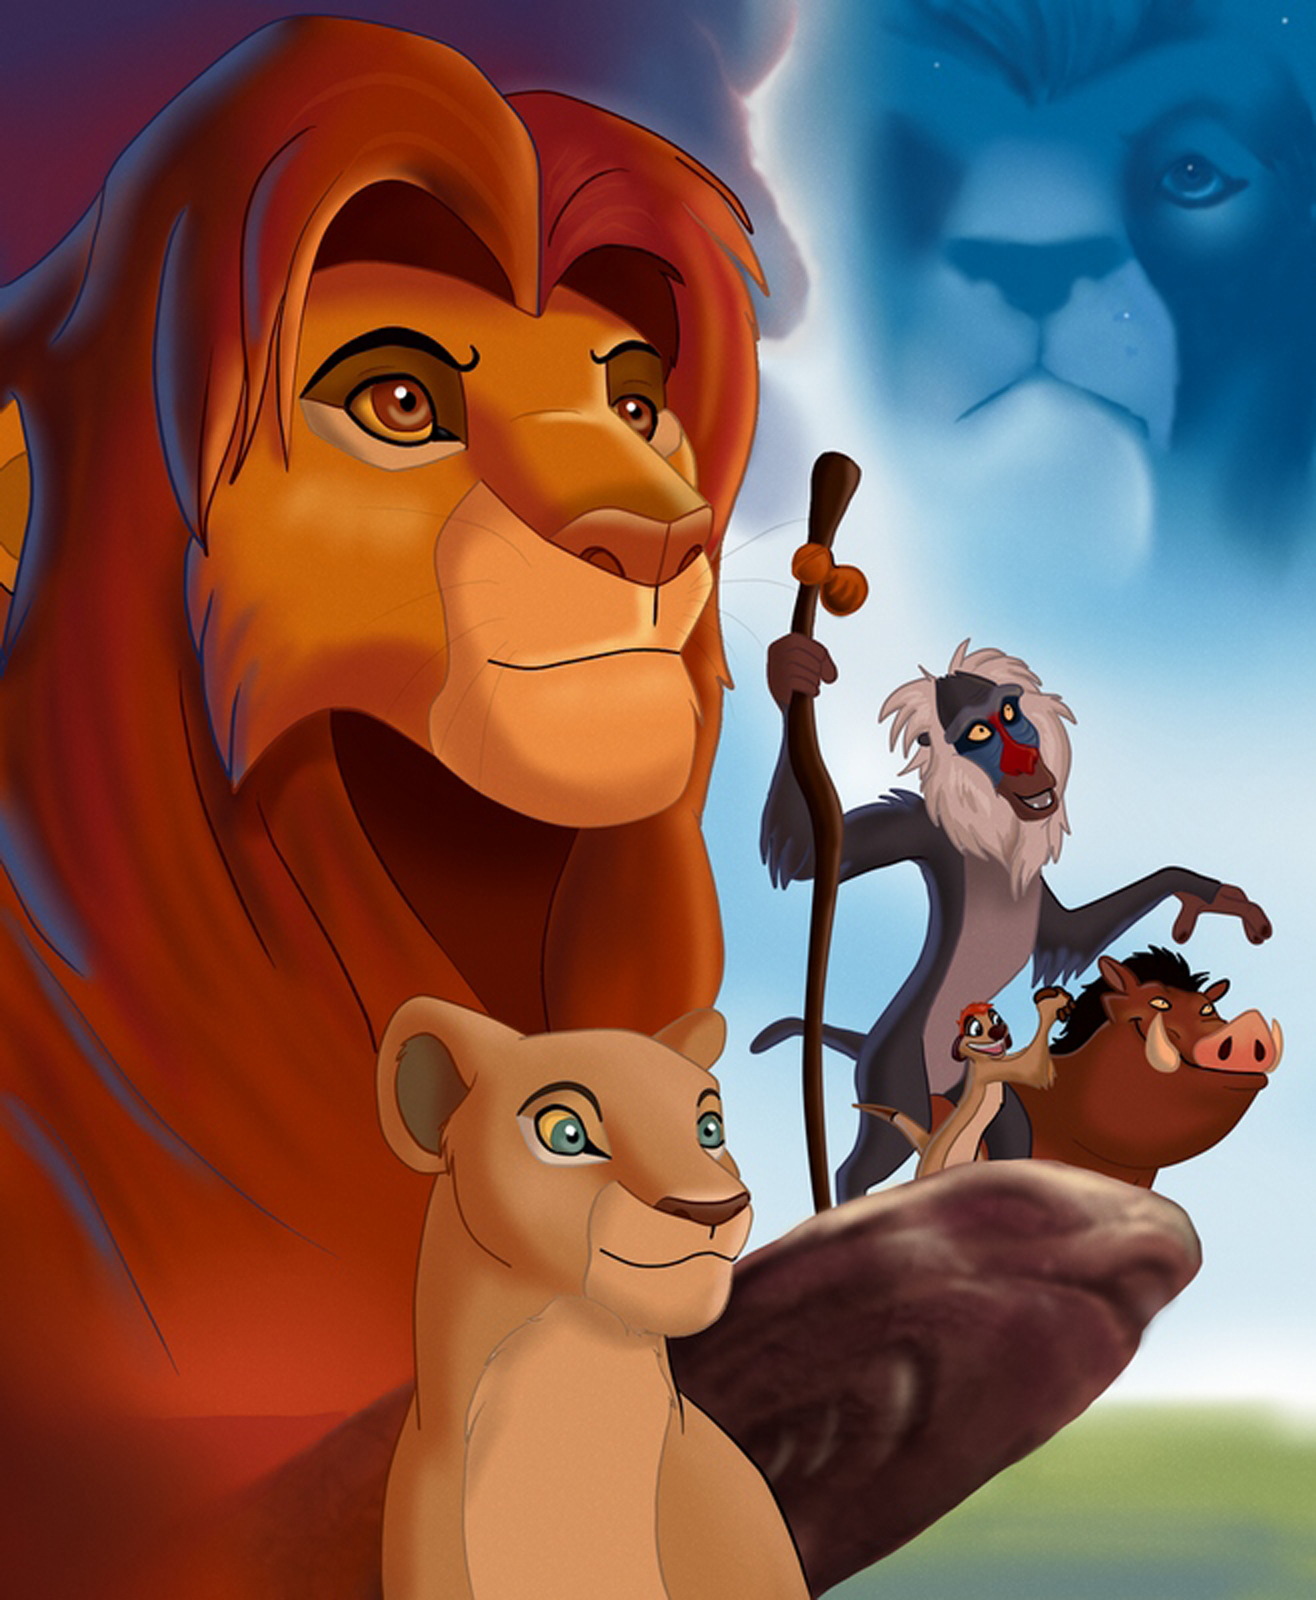 Simba The Lion King and Other Characters HD Wallpapers | Desktop ...